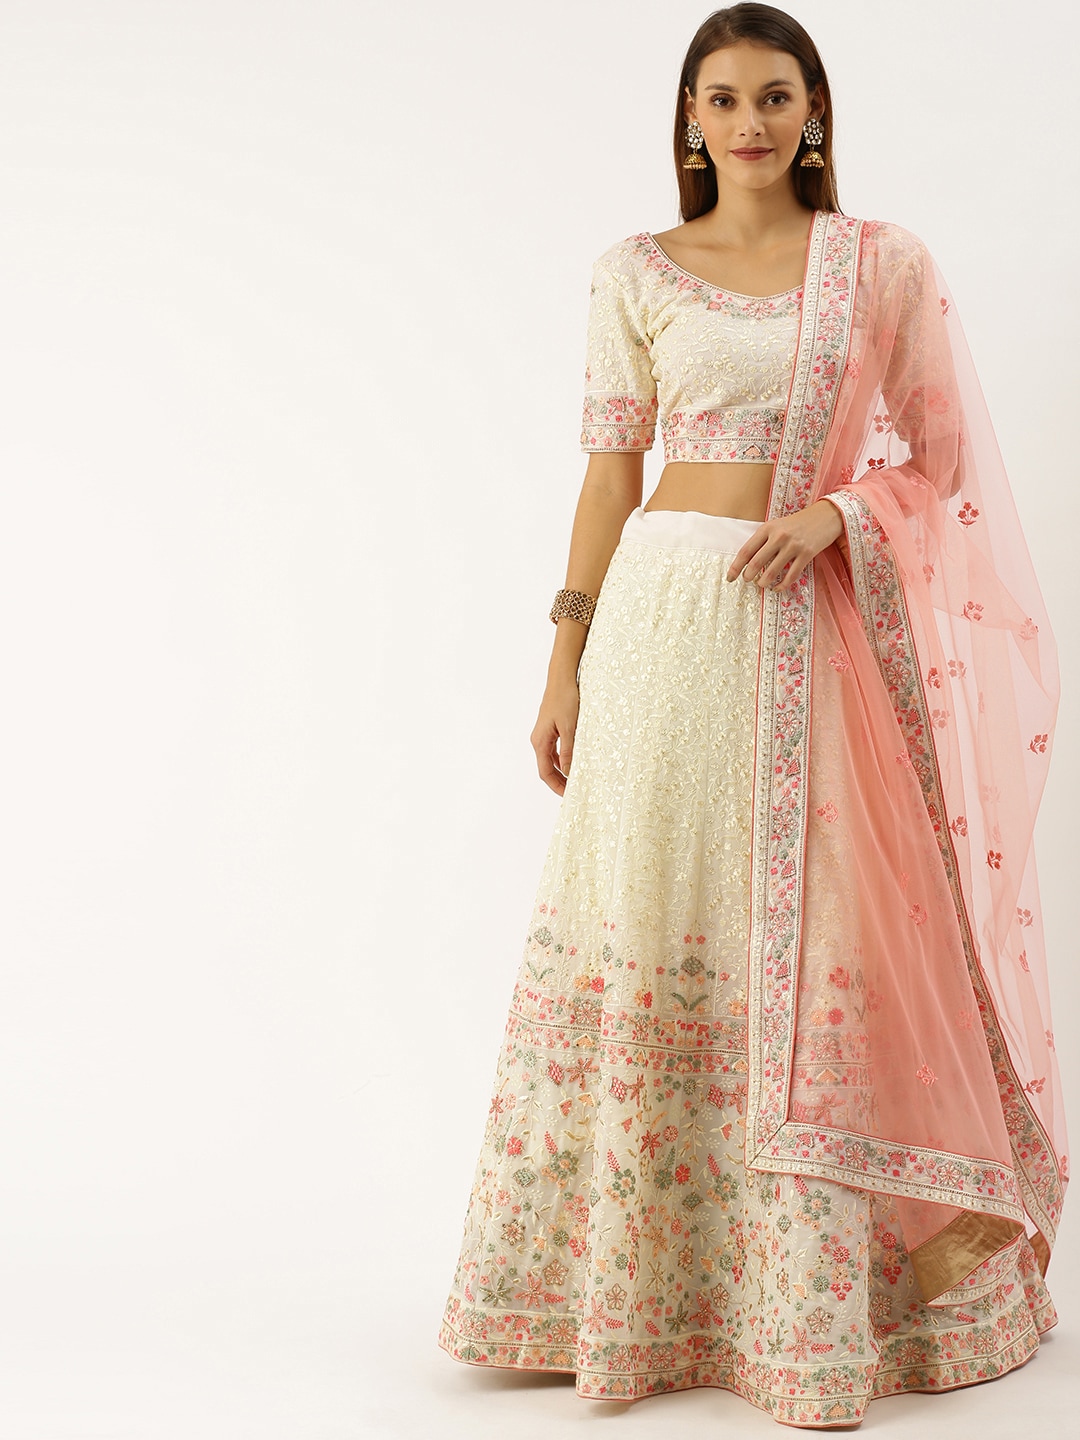 Shaily Off-White & Pink Embroidered Semi-Stitched Lehenga & Blouse with Dupatta Price in India